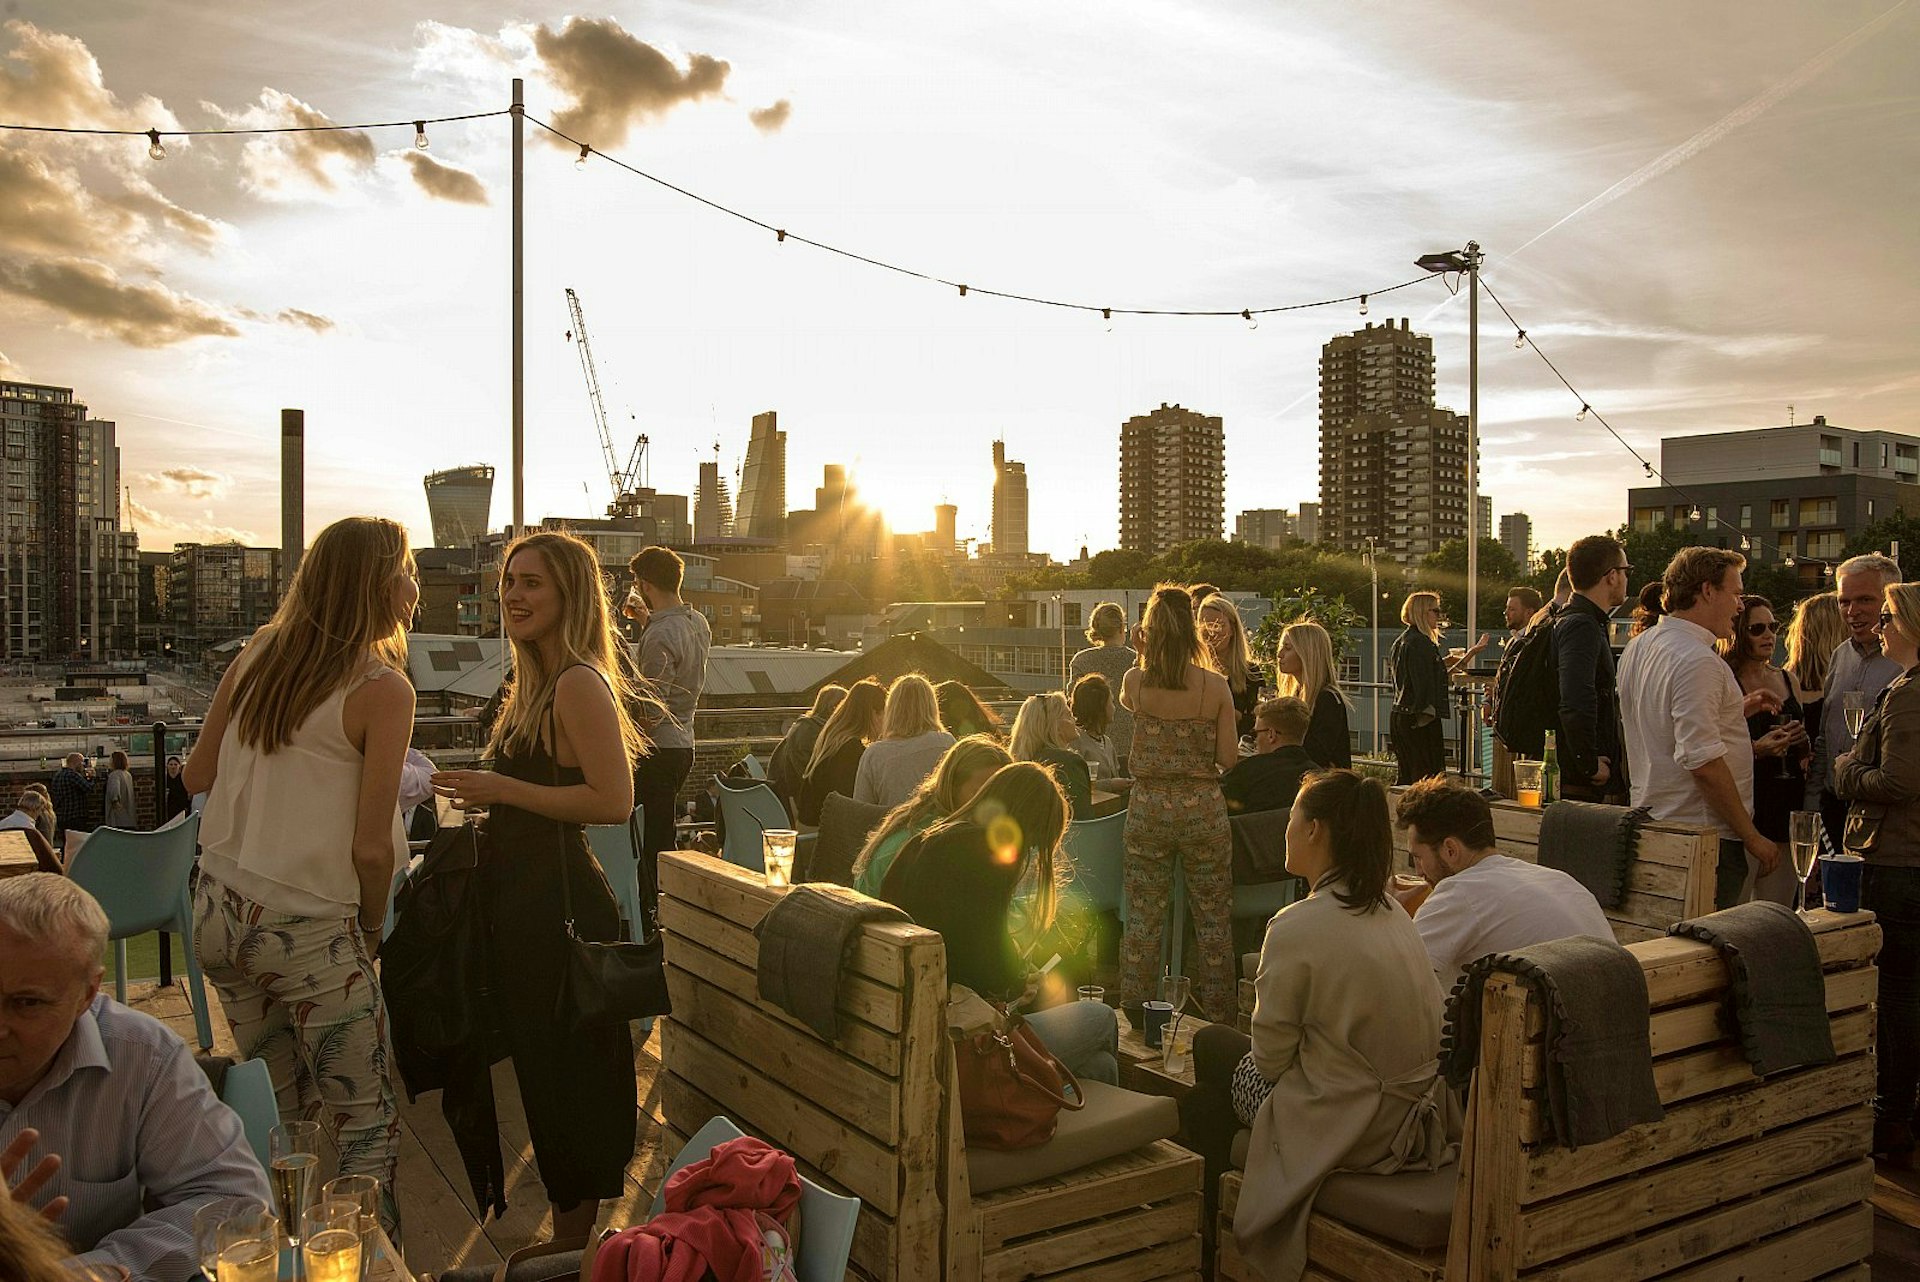 Drinkers converge at sunset on the Skylight rooftop; some are standing, while others sit on seats repurposed from wooden pallets, covered in grey cushions; the City of London and residential tower blocks are visible beyond.